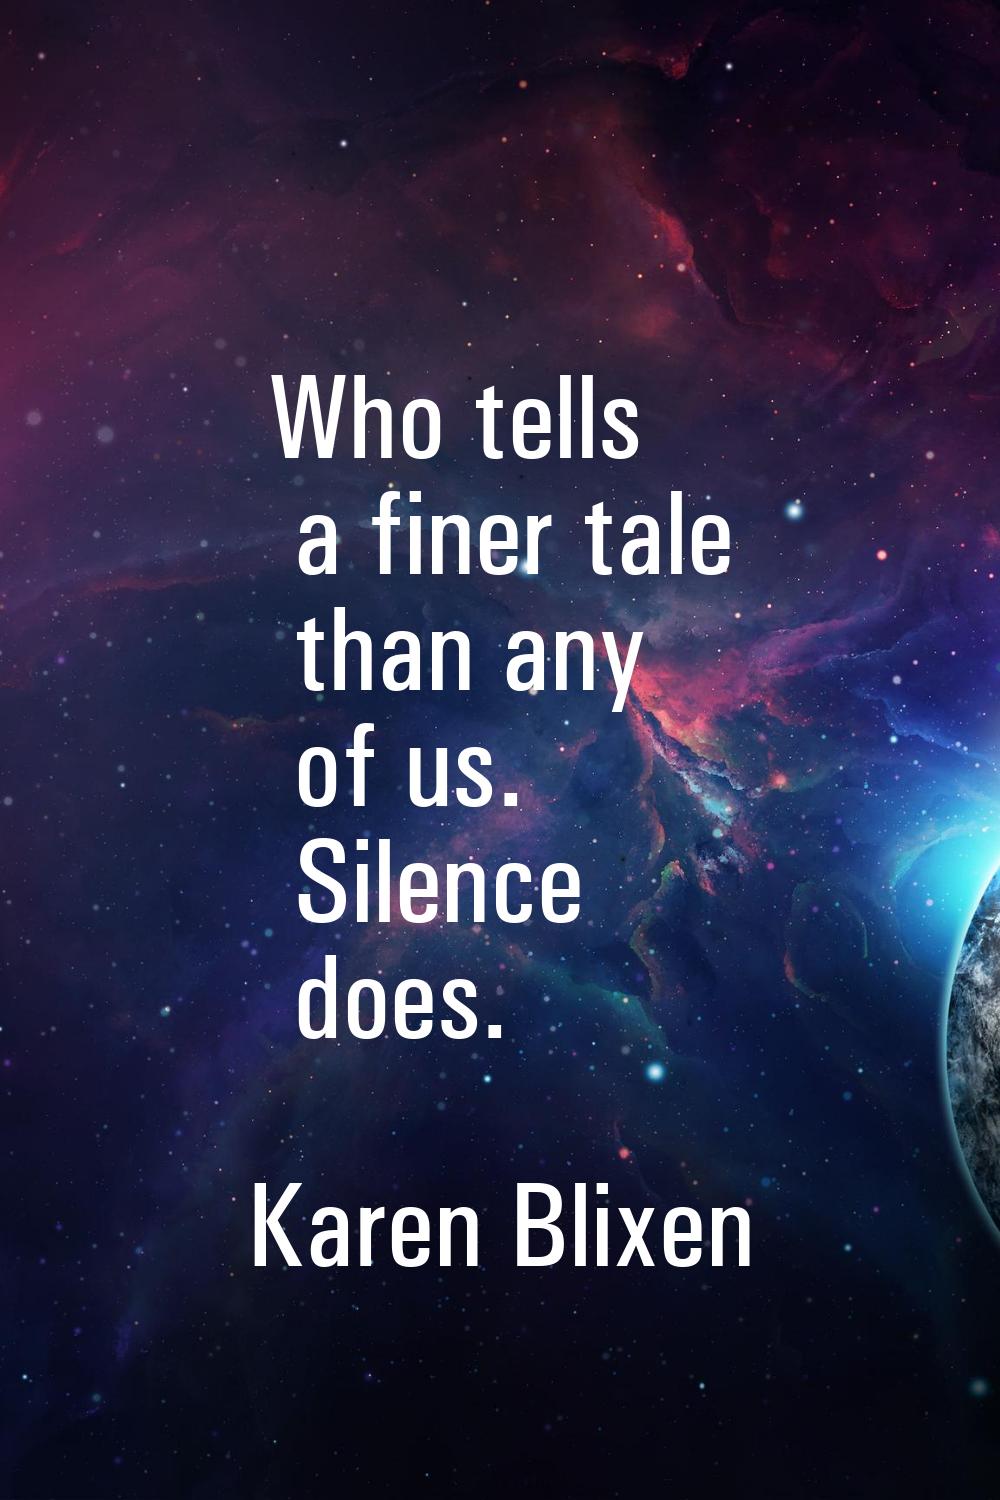 Who tells a finer tale than any of us. Silence does.